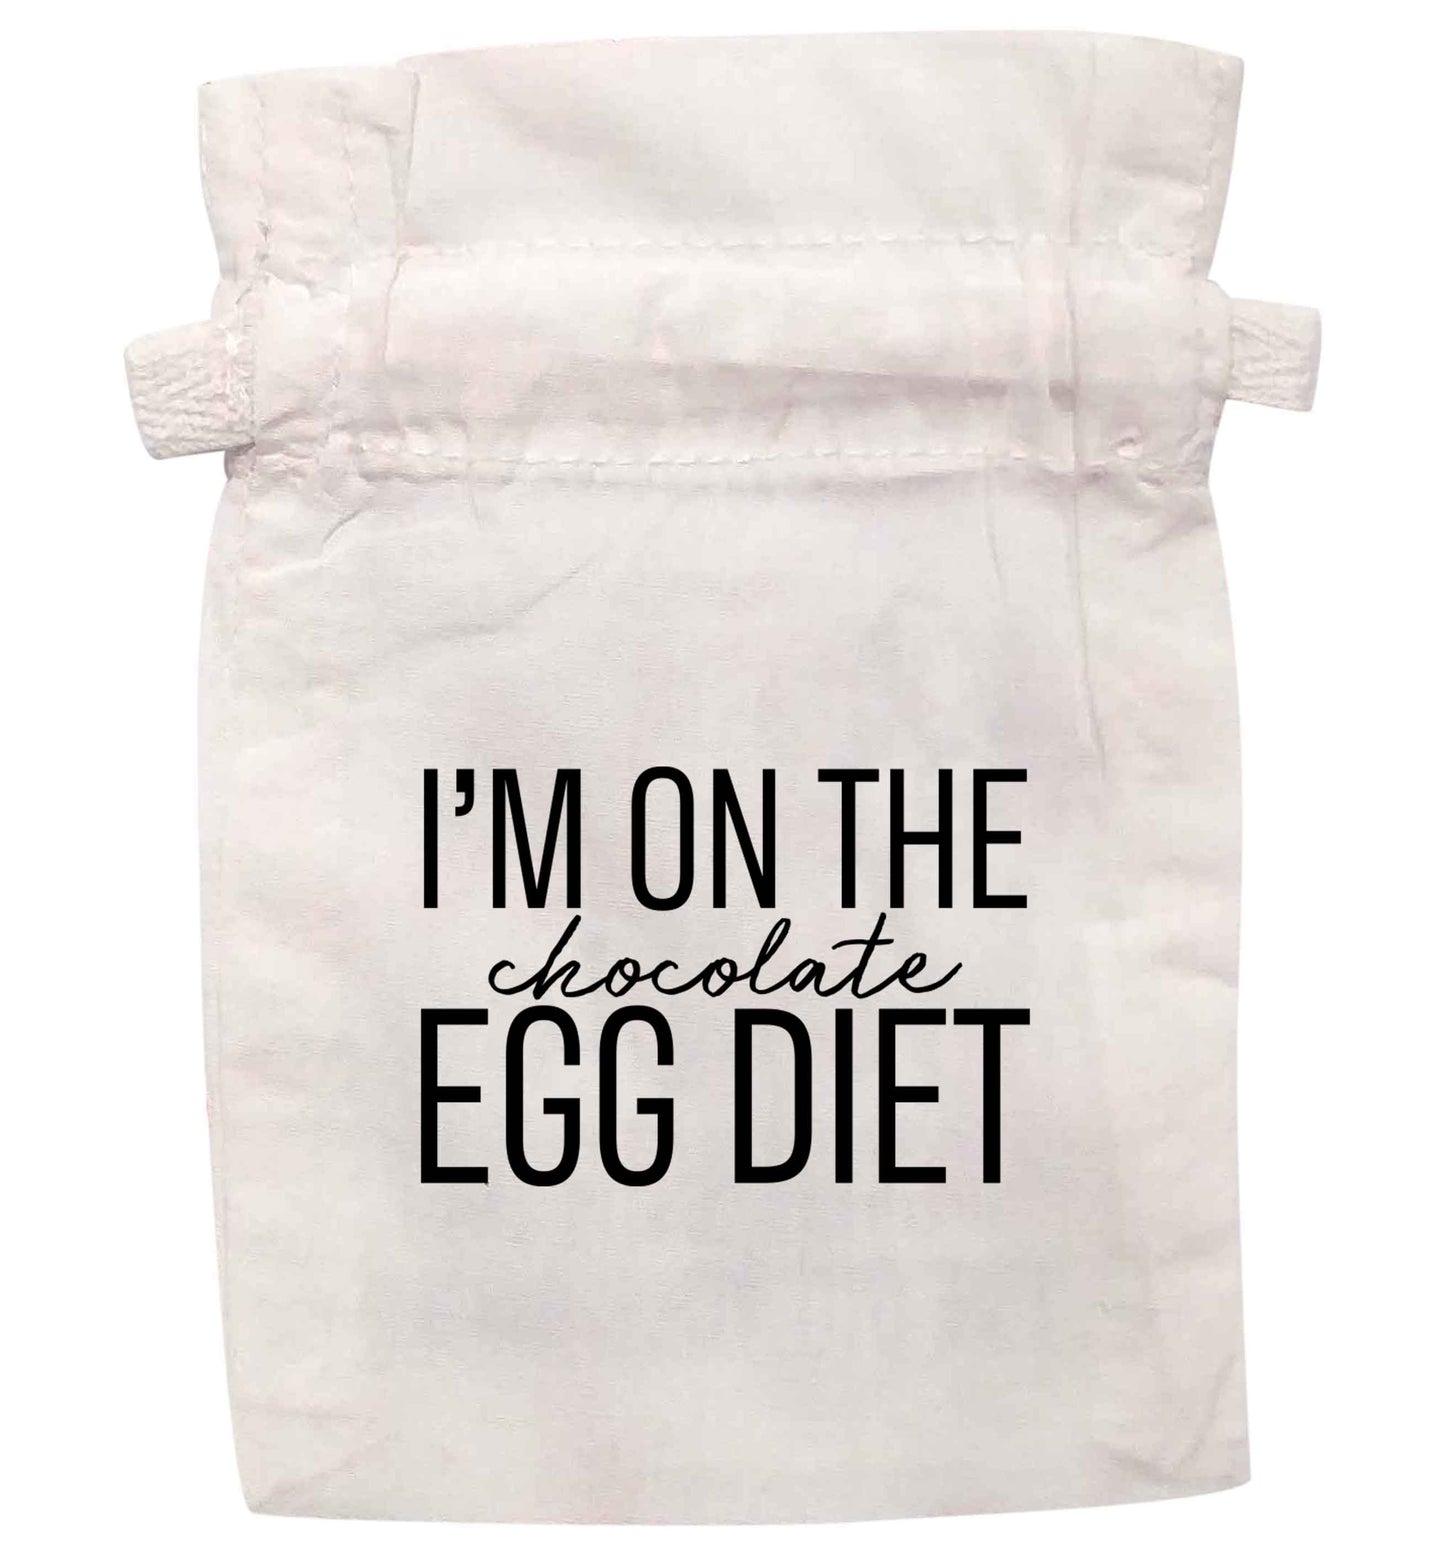 I'm on the chocolate egg diet | XS - L | Pouch / Drawstring bag / Sack | Organic Cotton | Bulk discounts available!